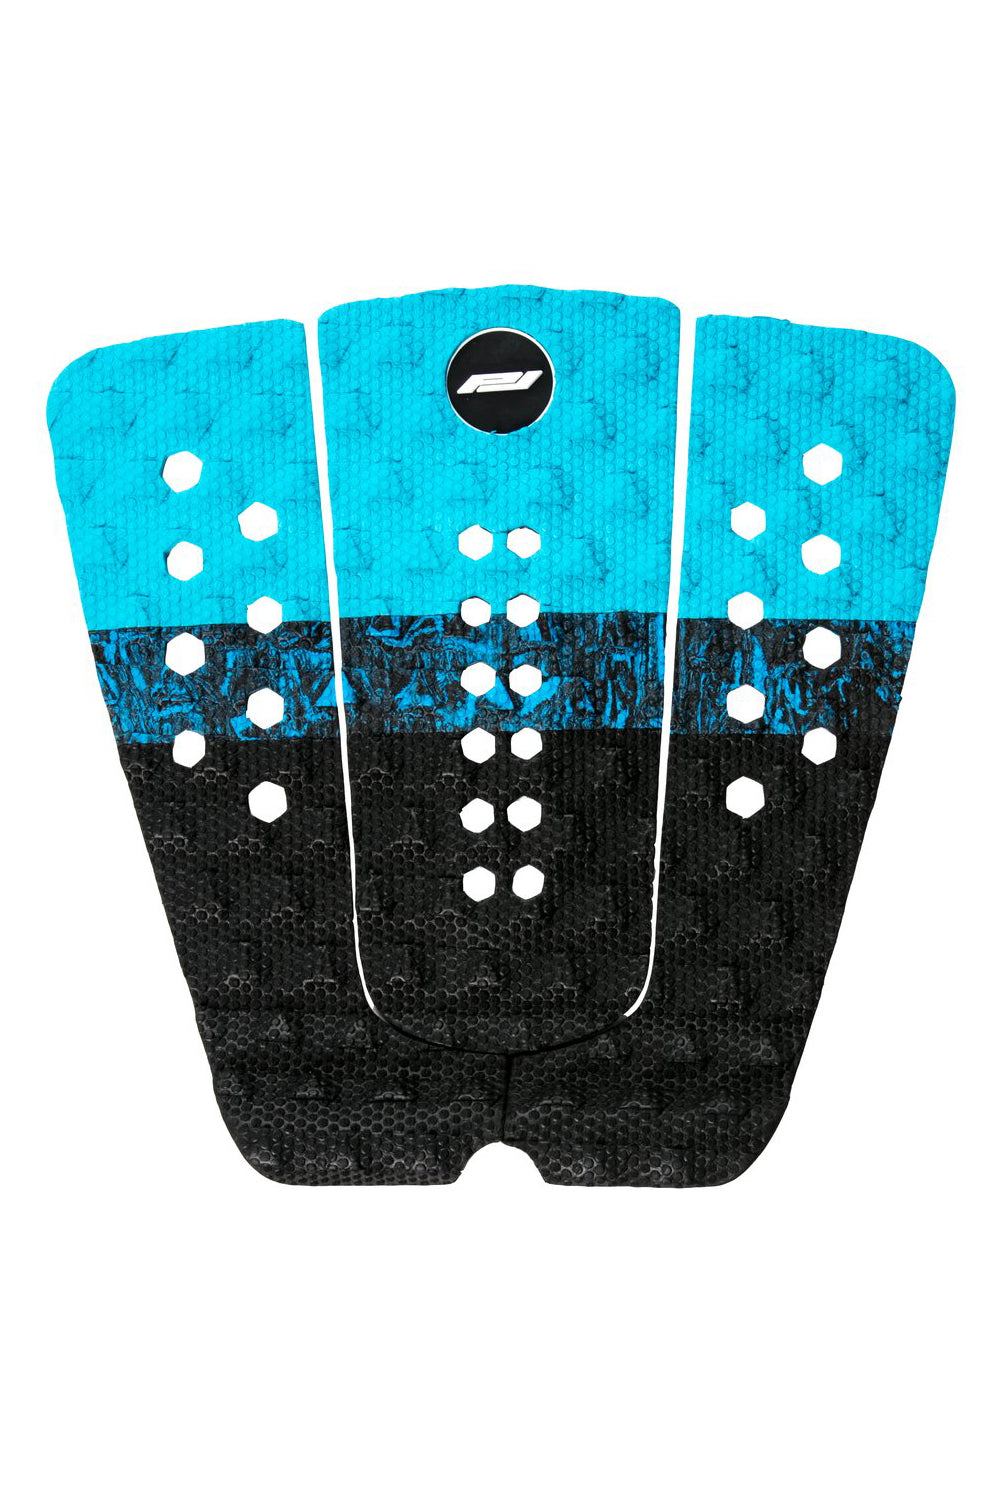 Pro Lite Traction Tail Pads